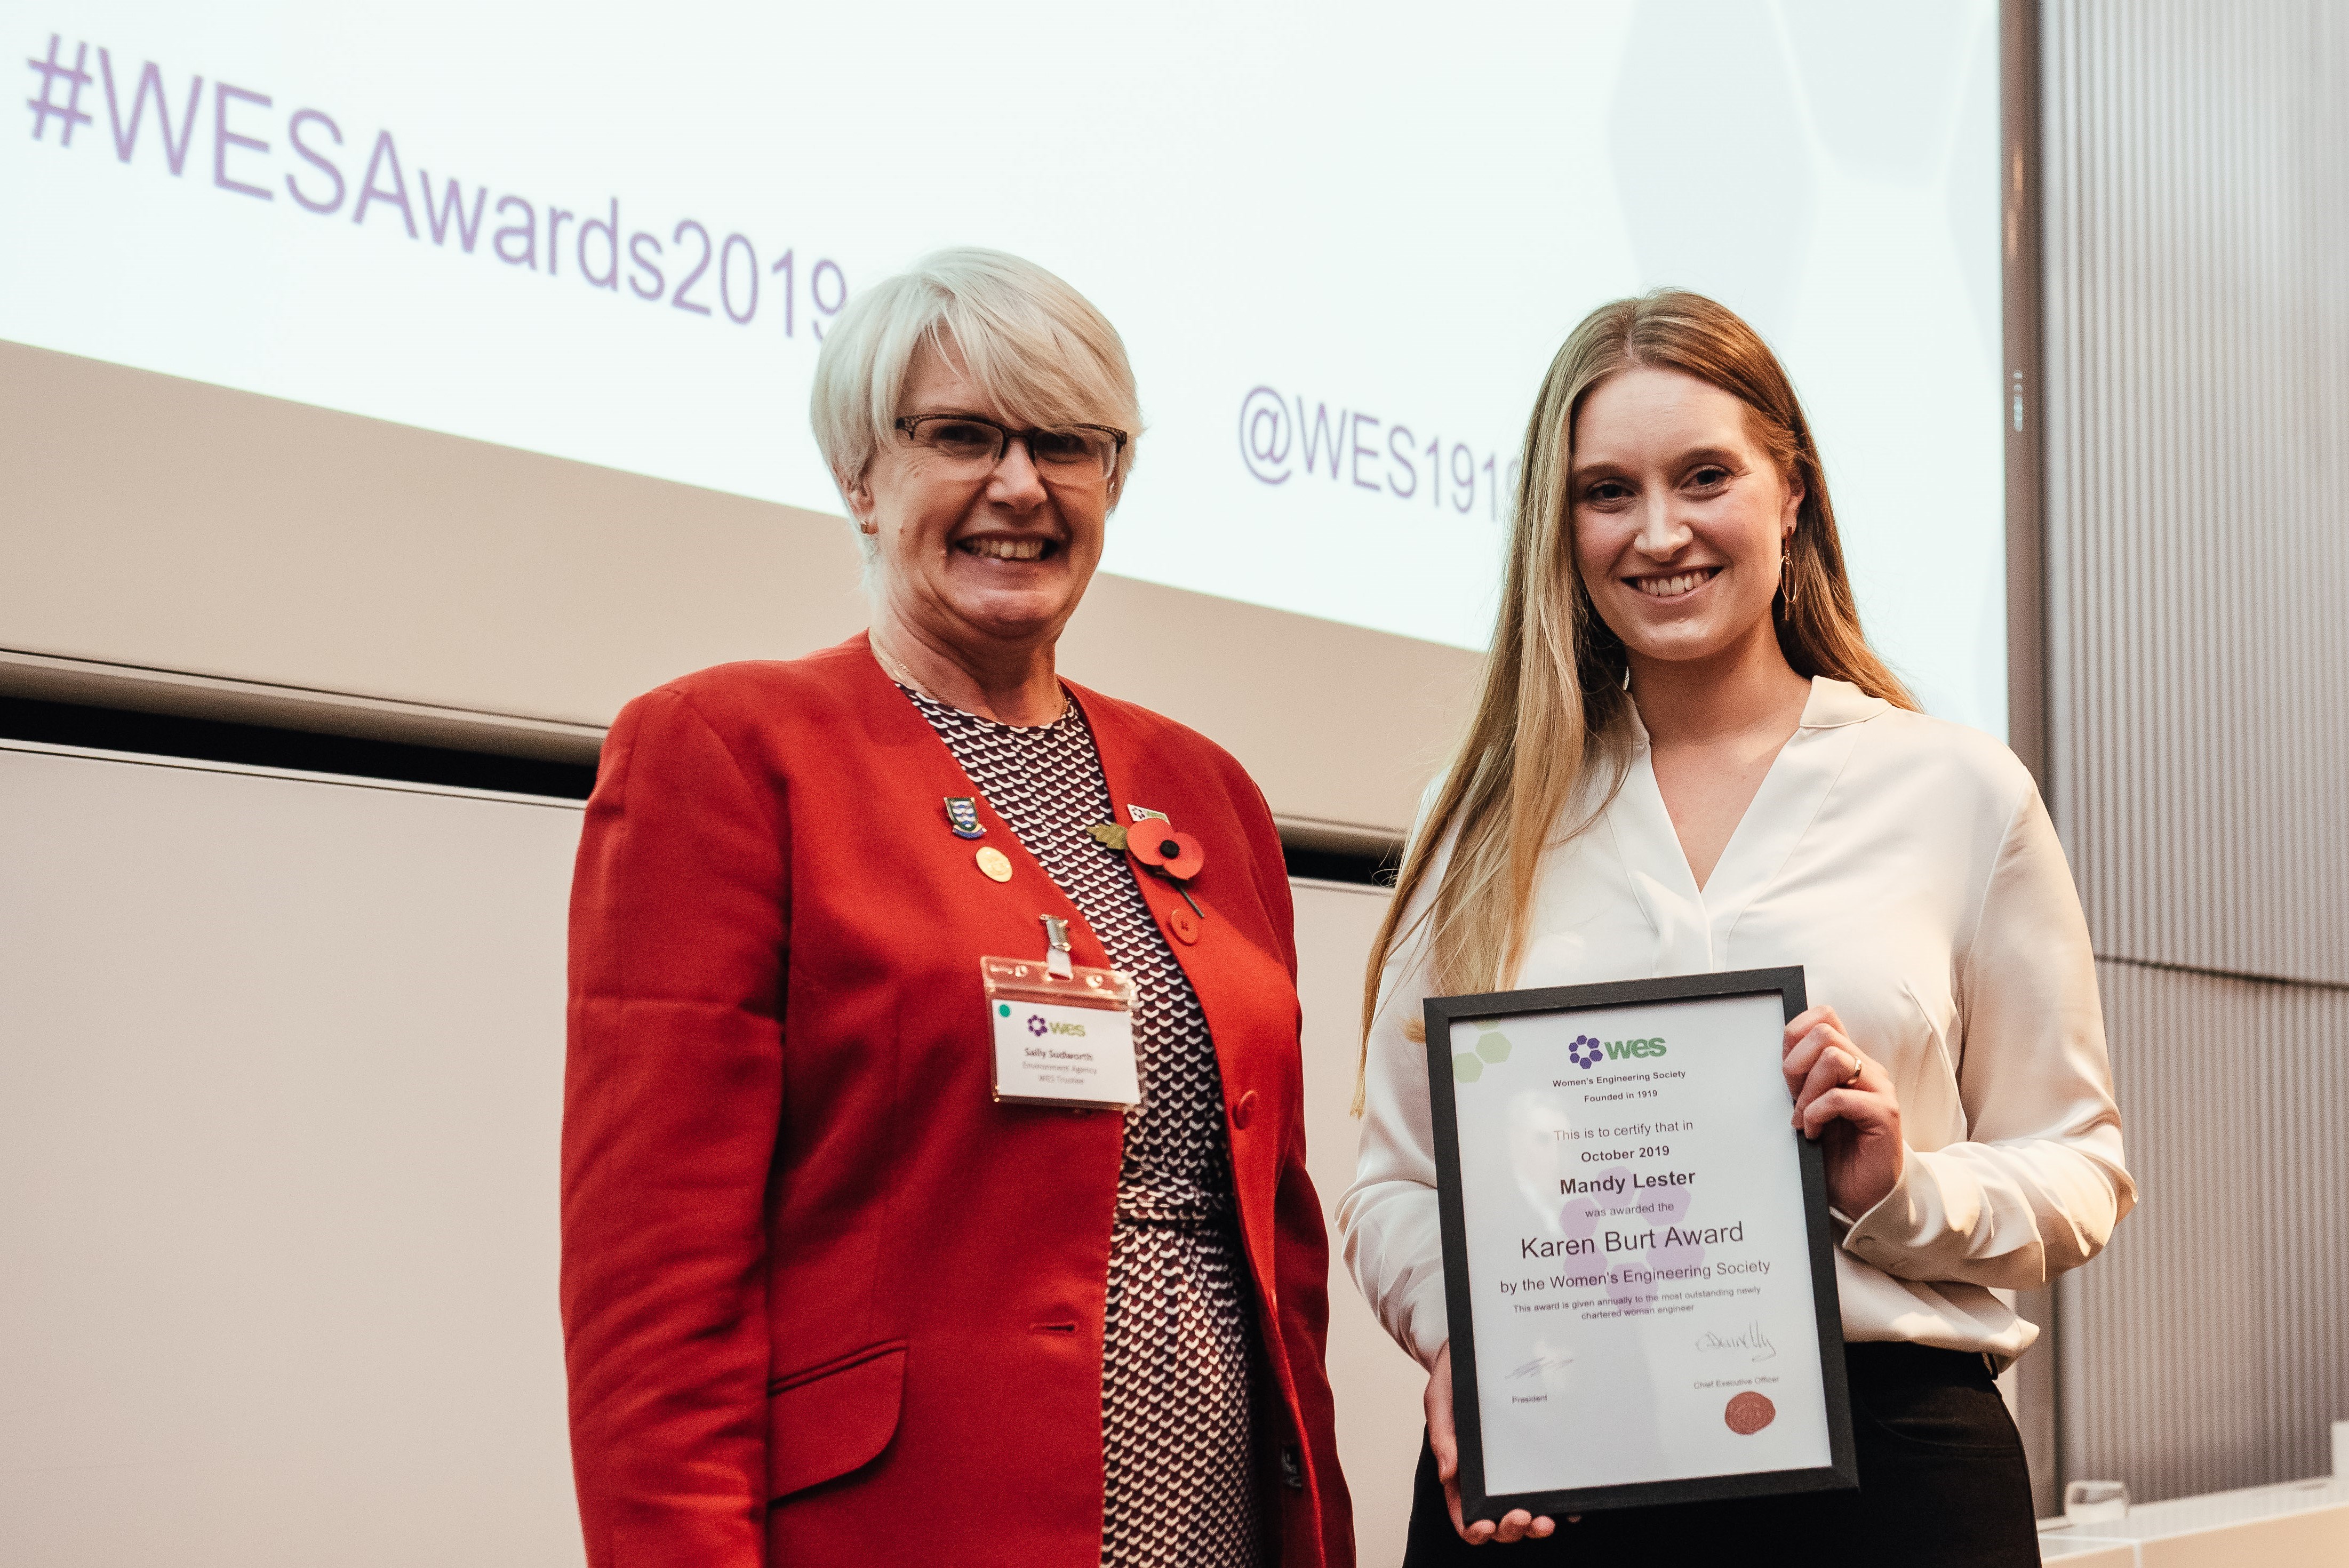 Mandy Lester receiving the WES Karen Burt Award for best new female Chartered Engineer from Sally Sudworth